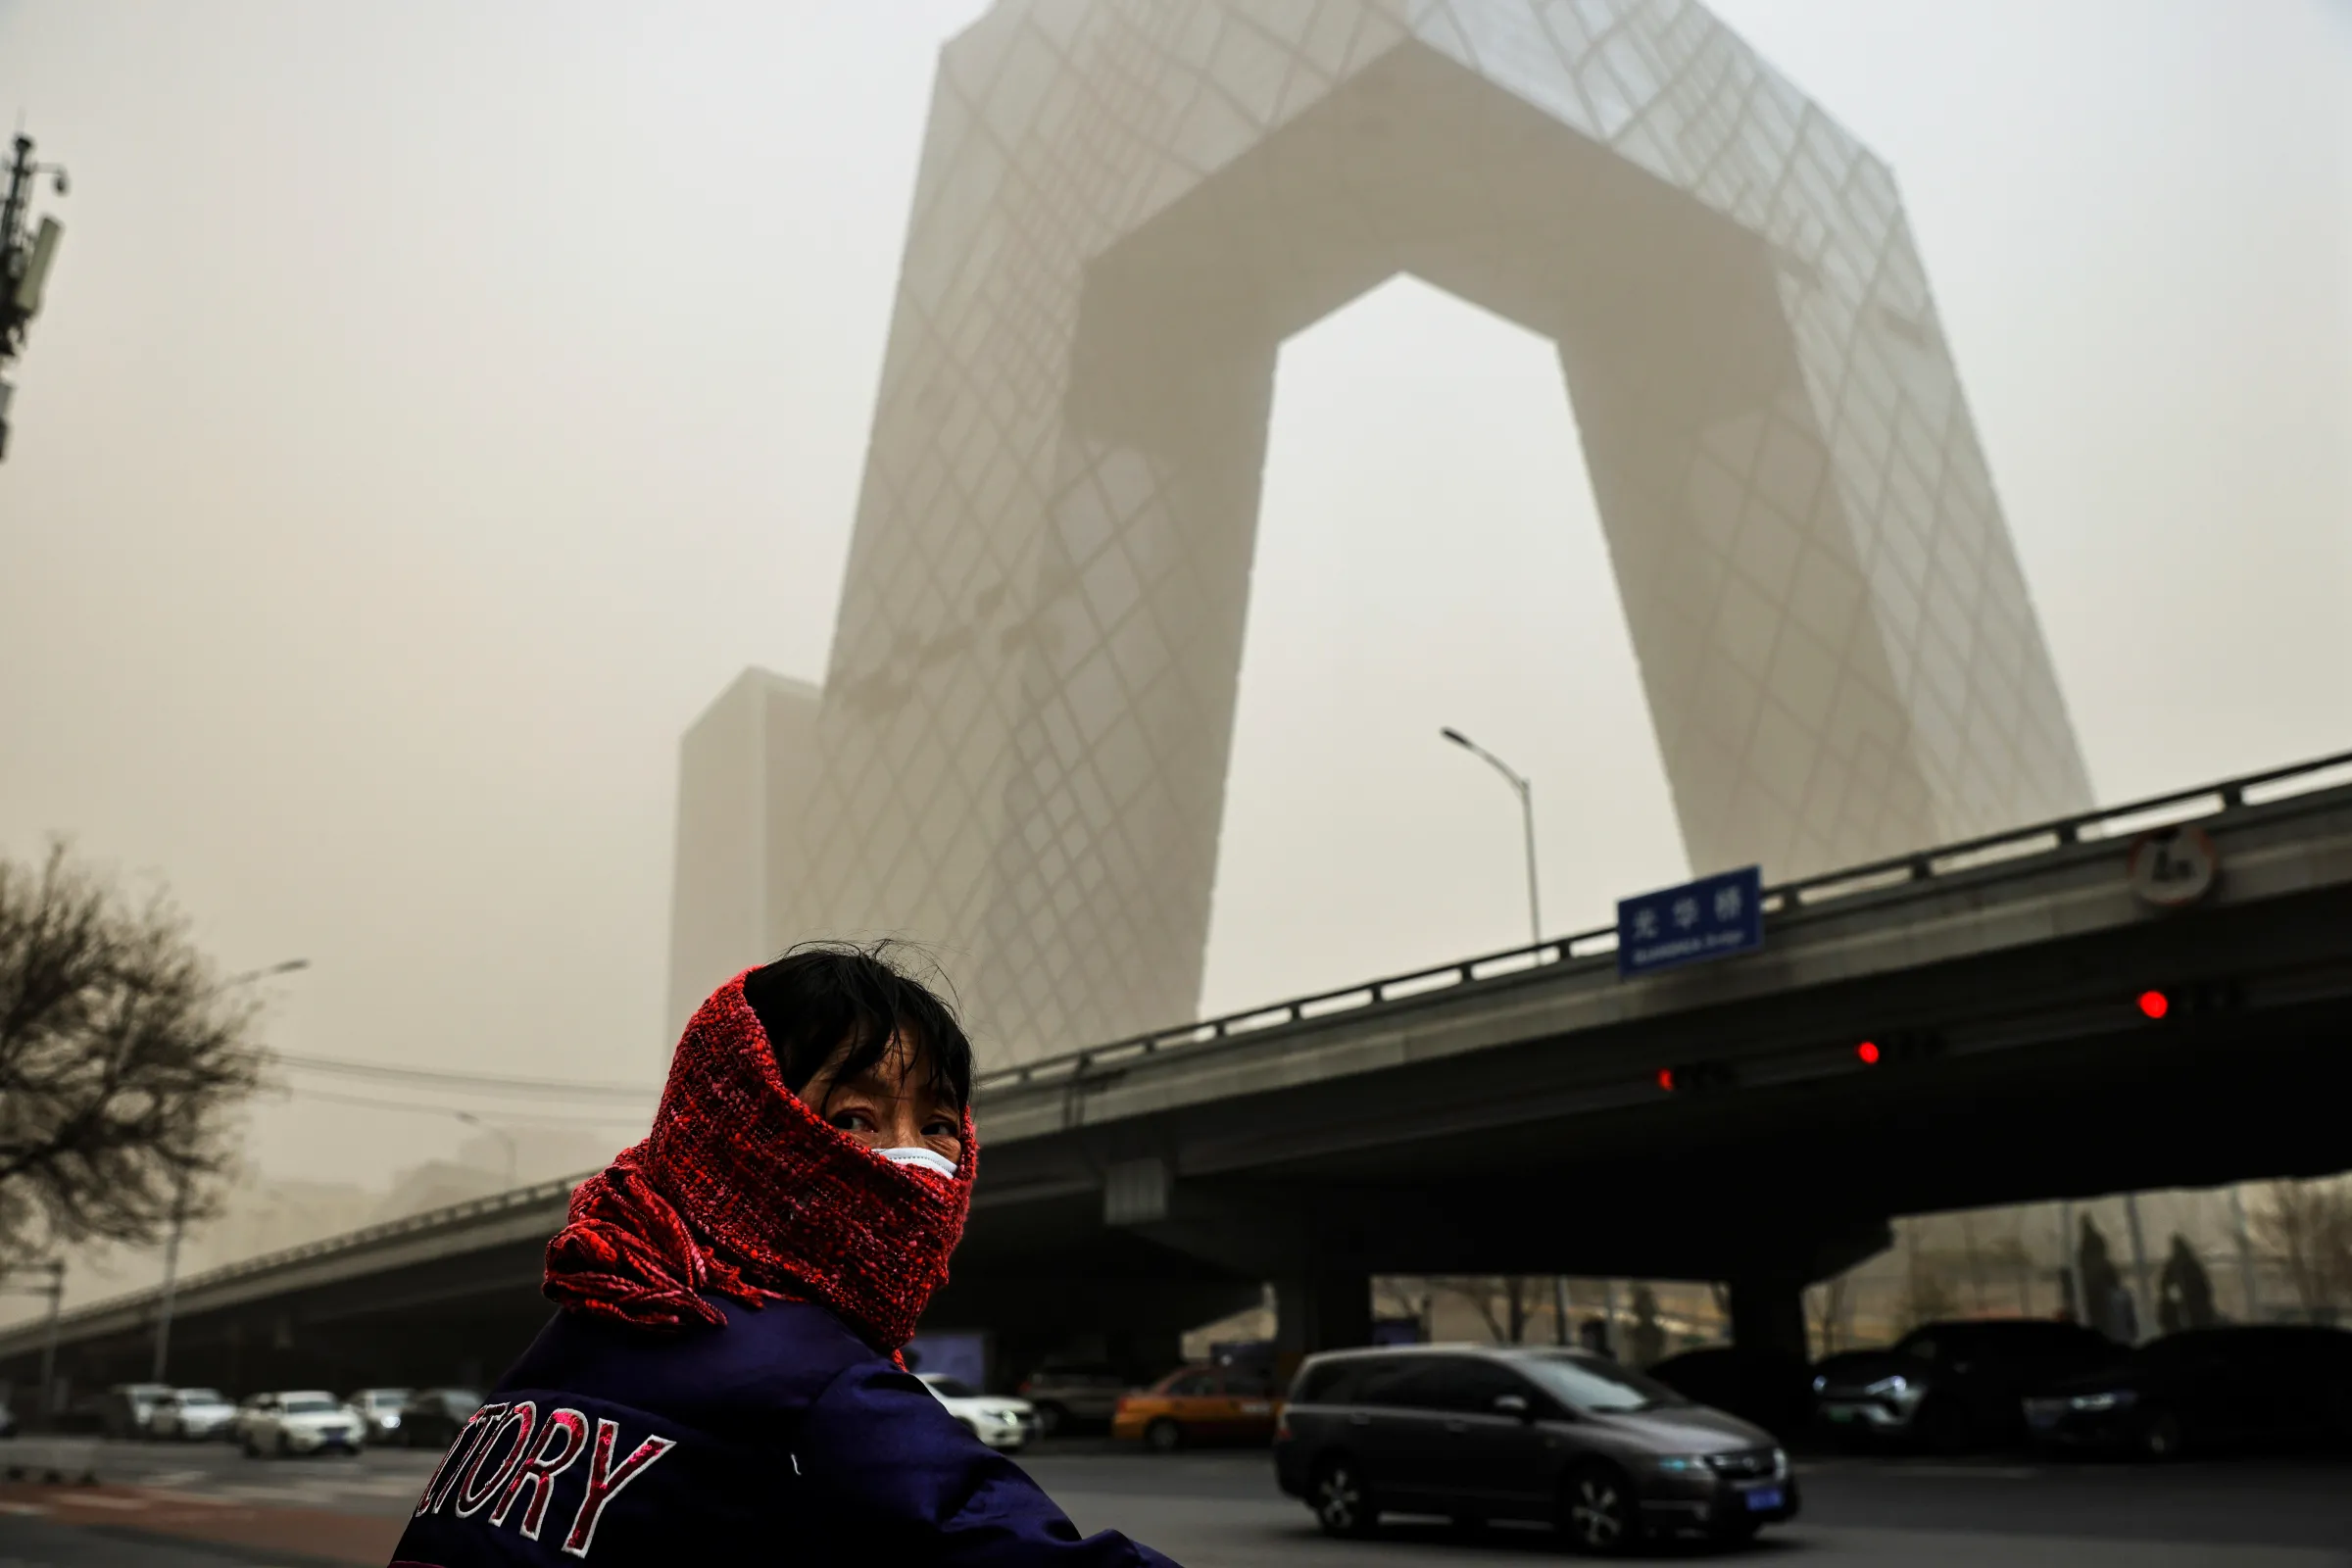 A woman wearing a head covering is seen in front of the headquarters of China's state media broadcaster CCTV that is shrouded in haze after a sandstorm